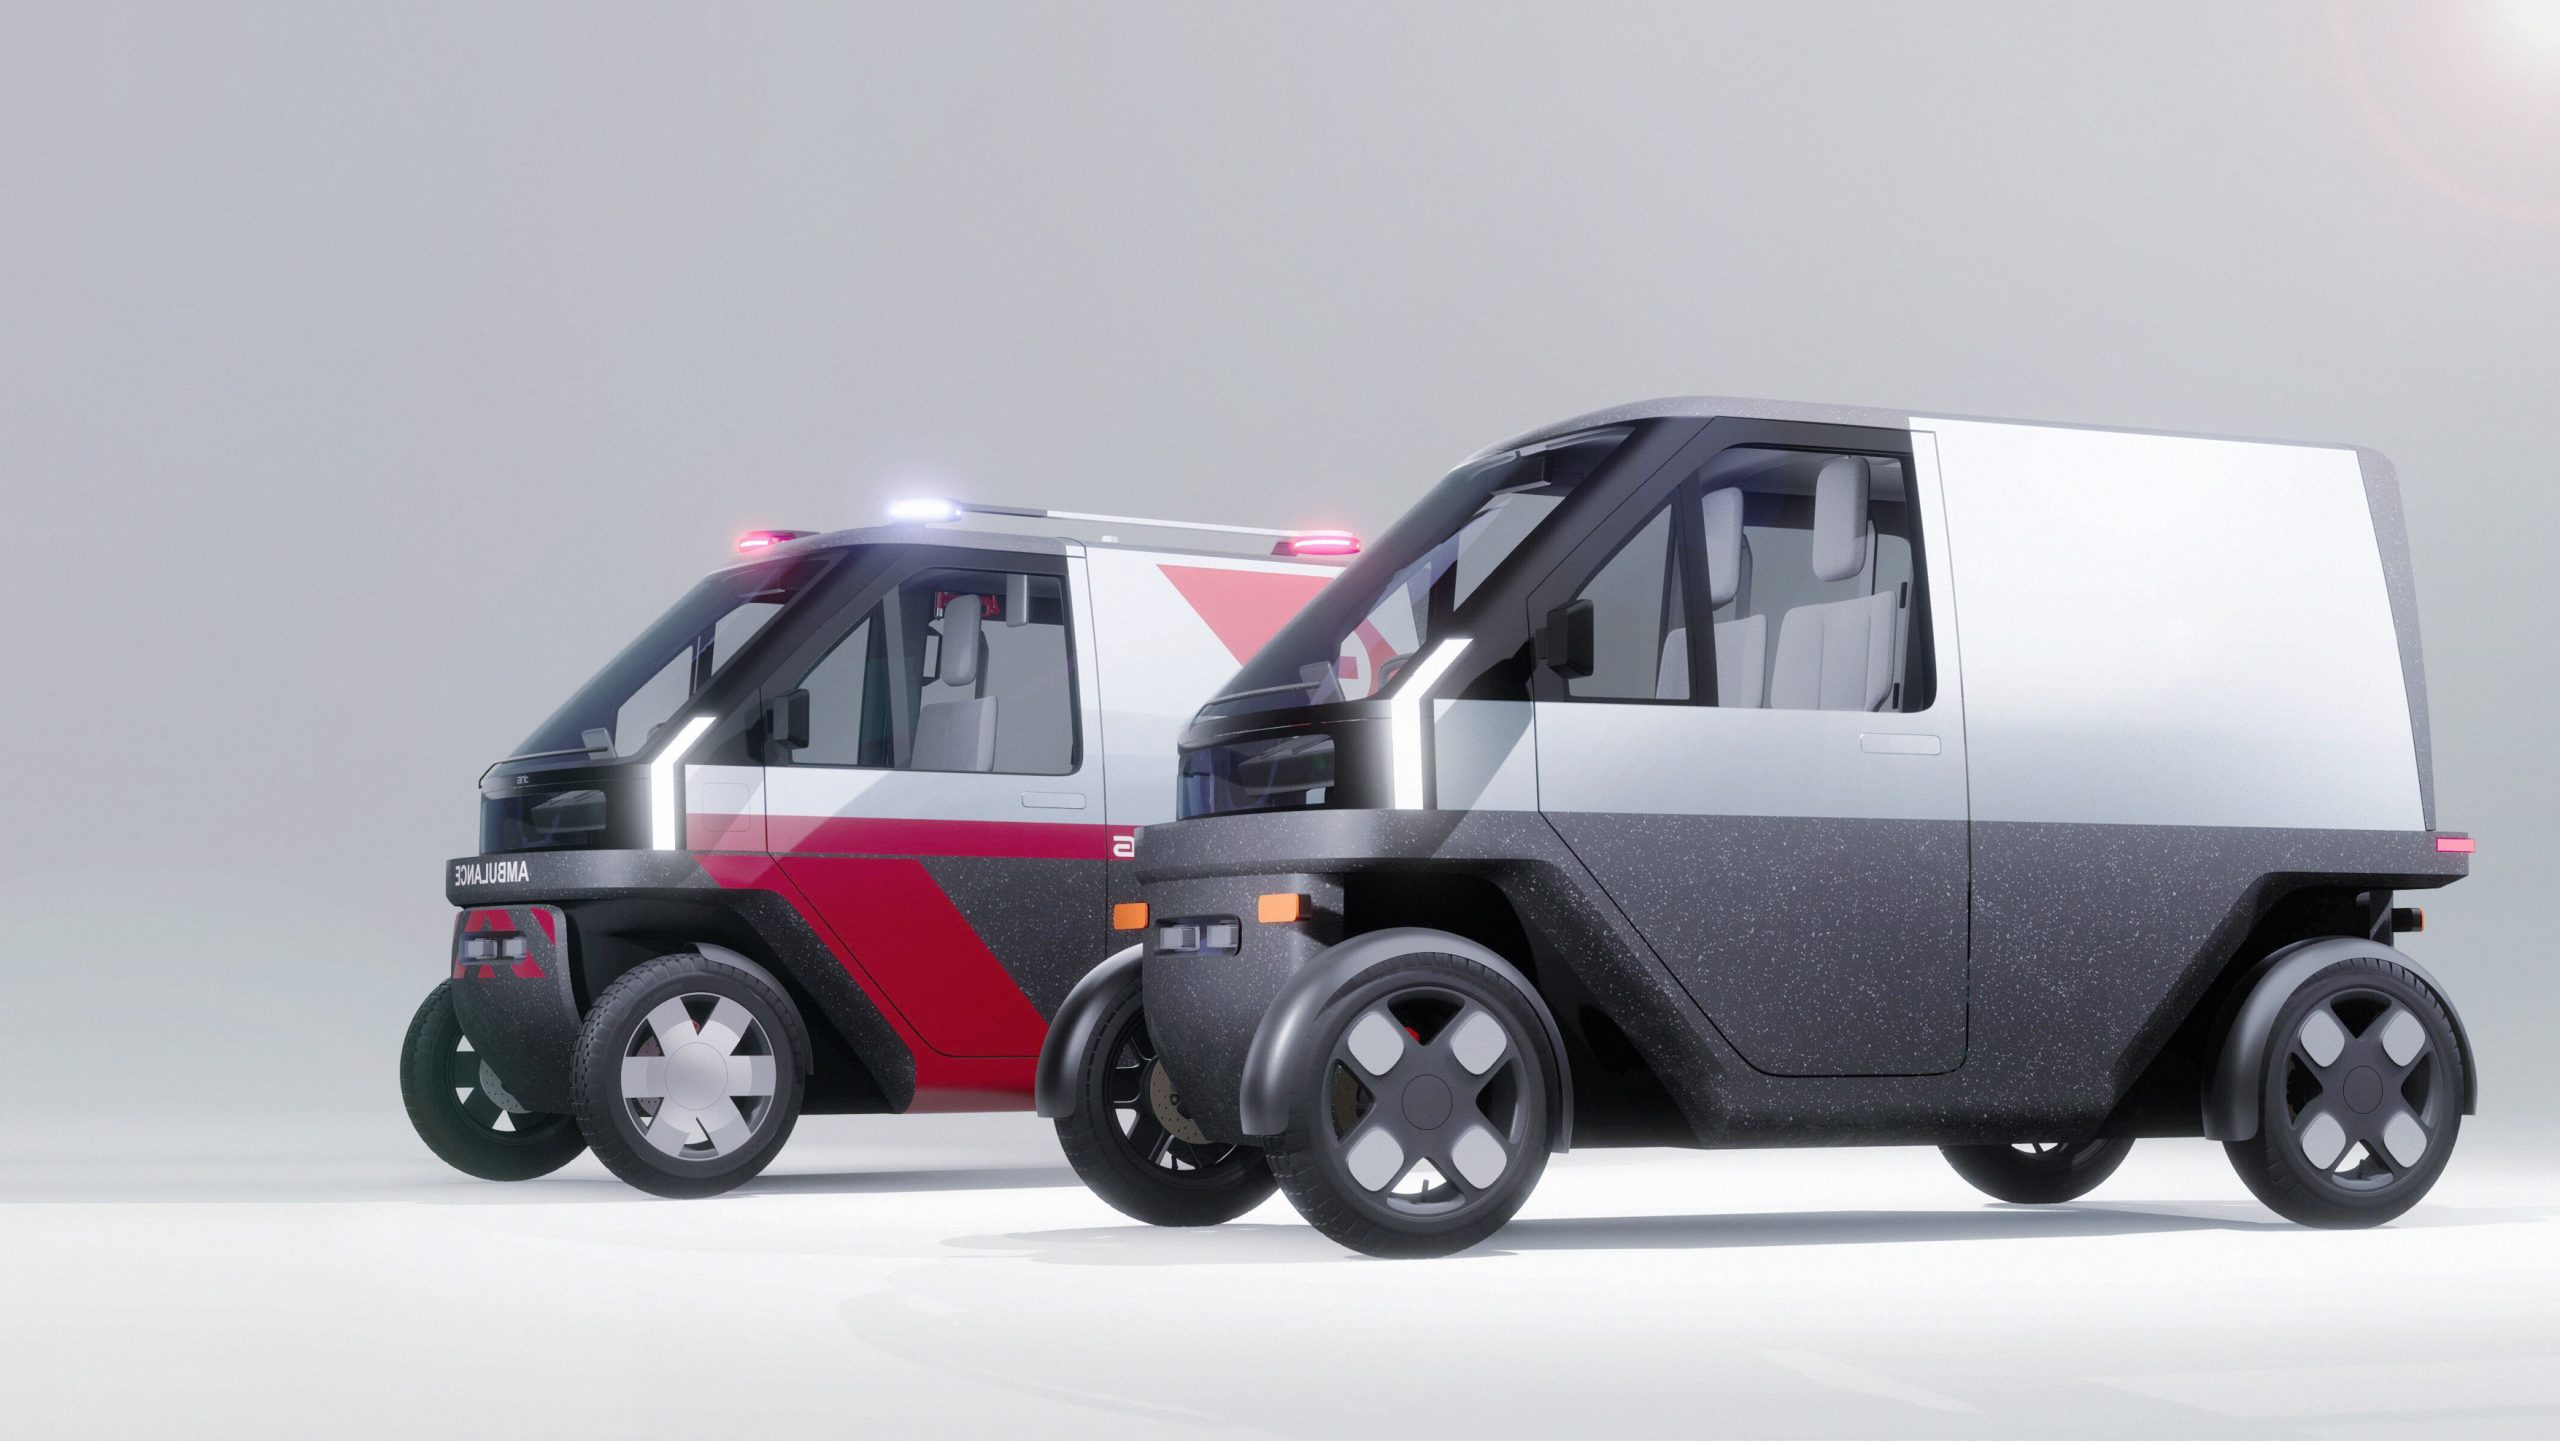 Ant-Mobility’s first product is a small electric ambulance to be used in India, with the goal of significantly reducing response times and saving tens of thousands of lives a year